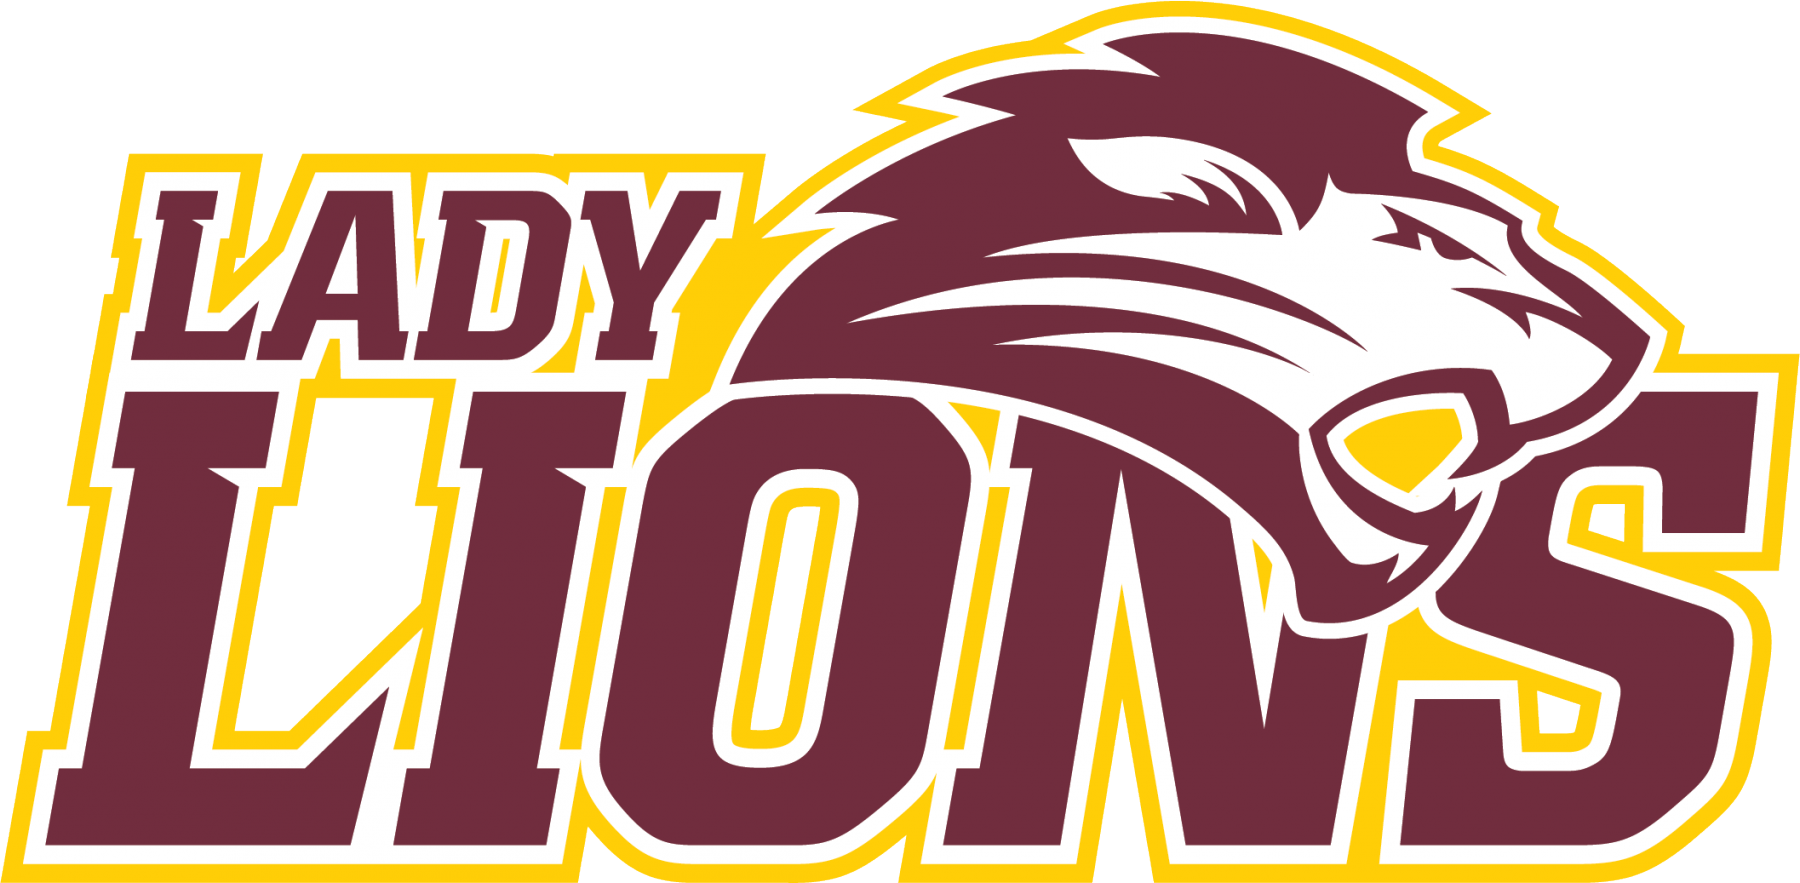 Lady Lions Basketball Logo - American Midwest Conference - 2018 Women's Basketball Conference ...